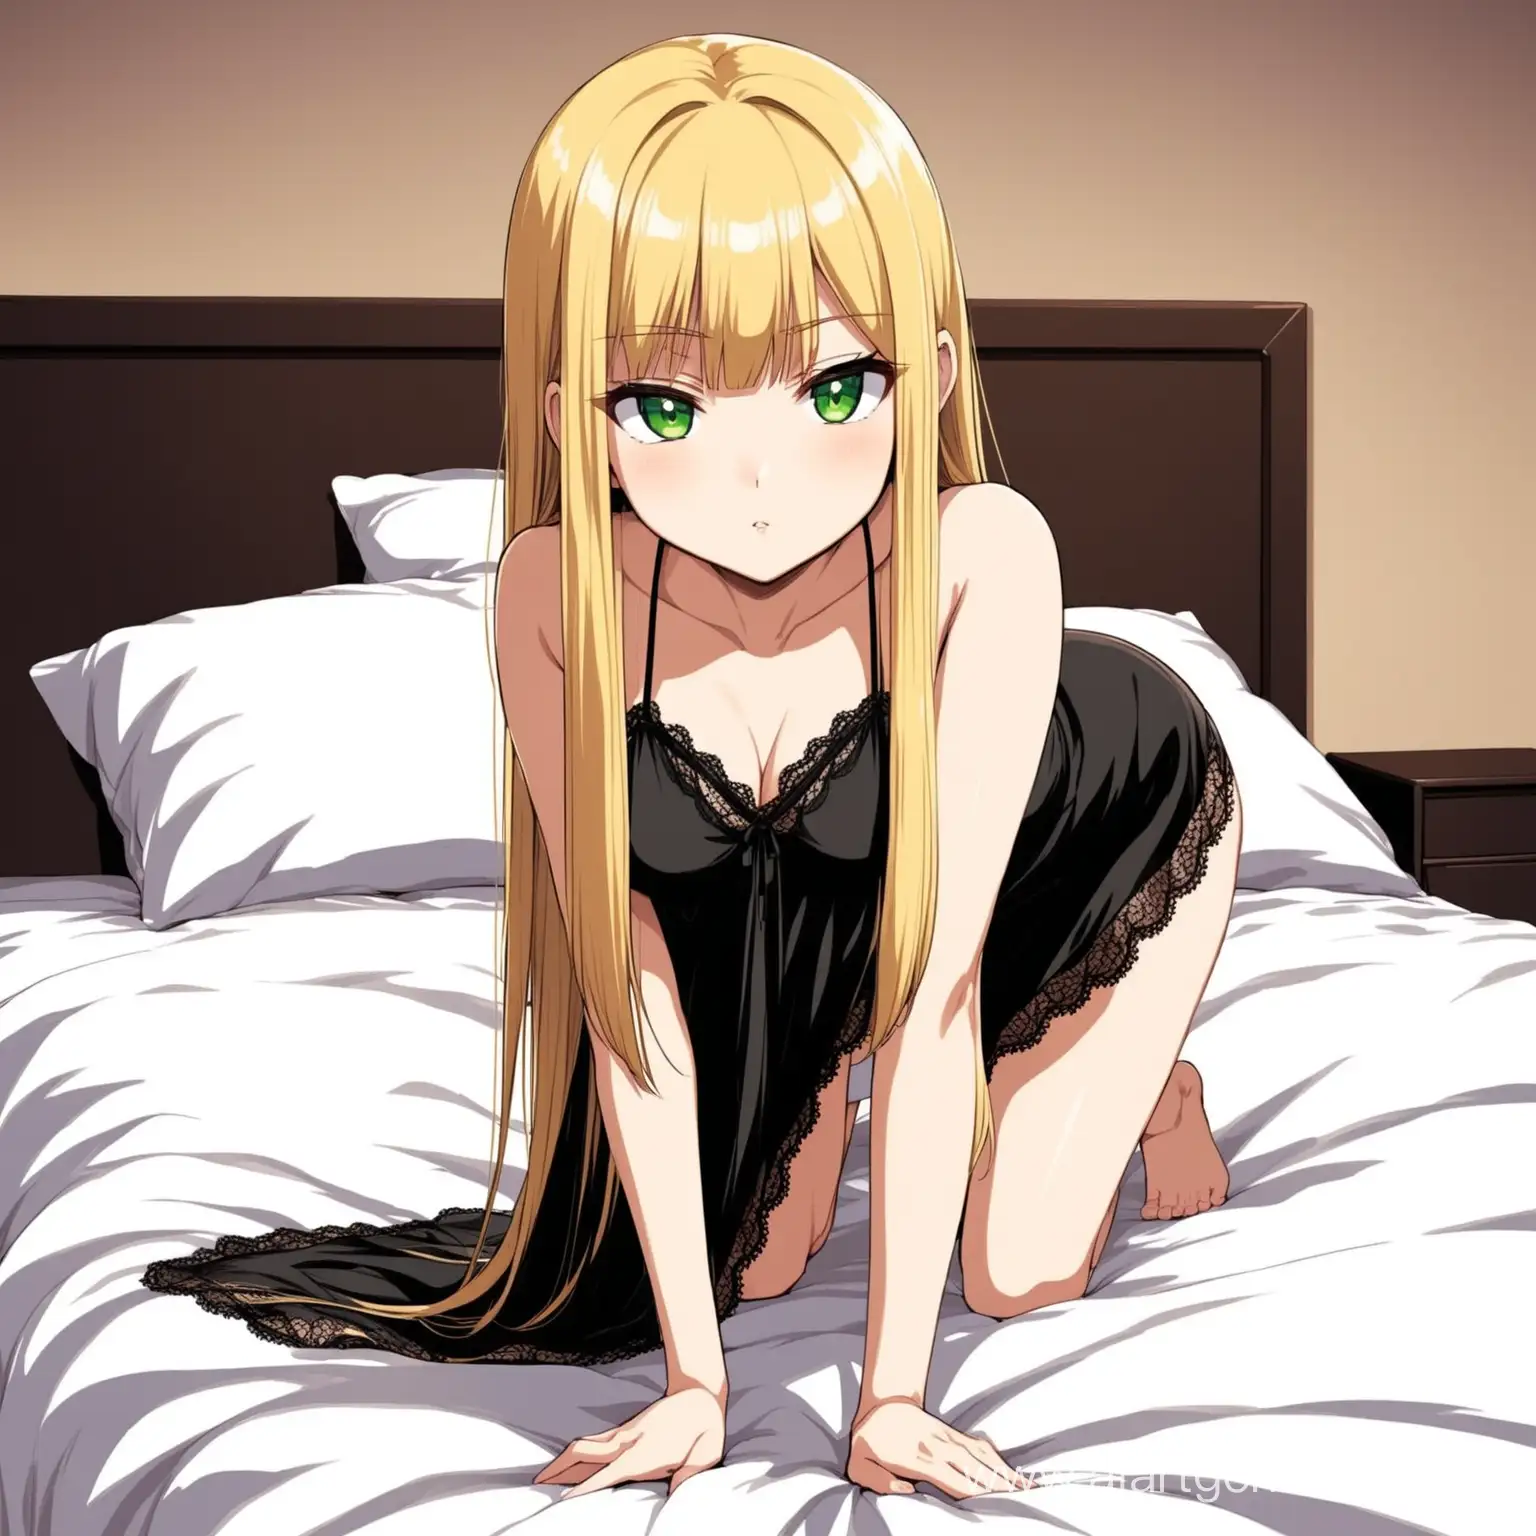 low girl, big green eyes, long blonde straight hair with straight bangs ,She is wearing a short seductive black nightgown, she is standing on the bed on all fours, anime style